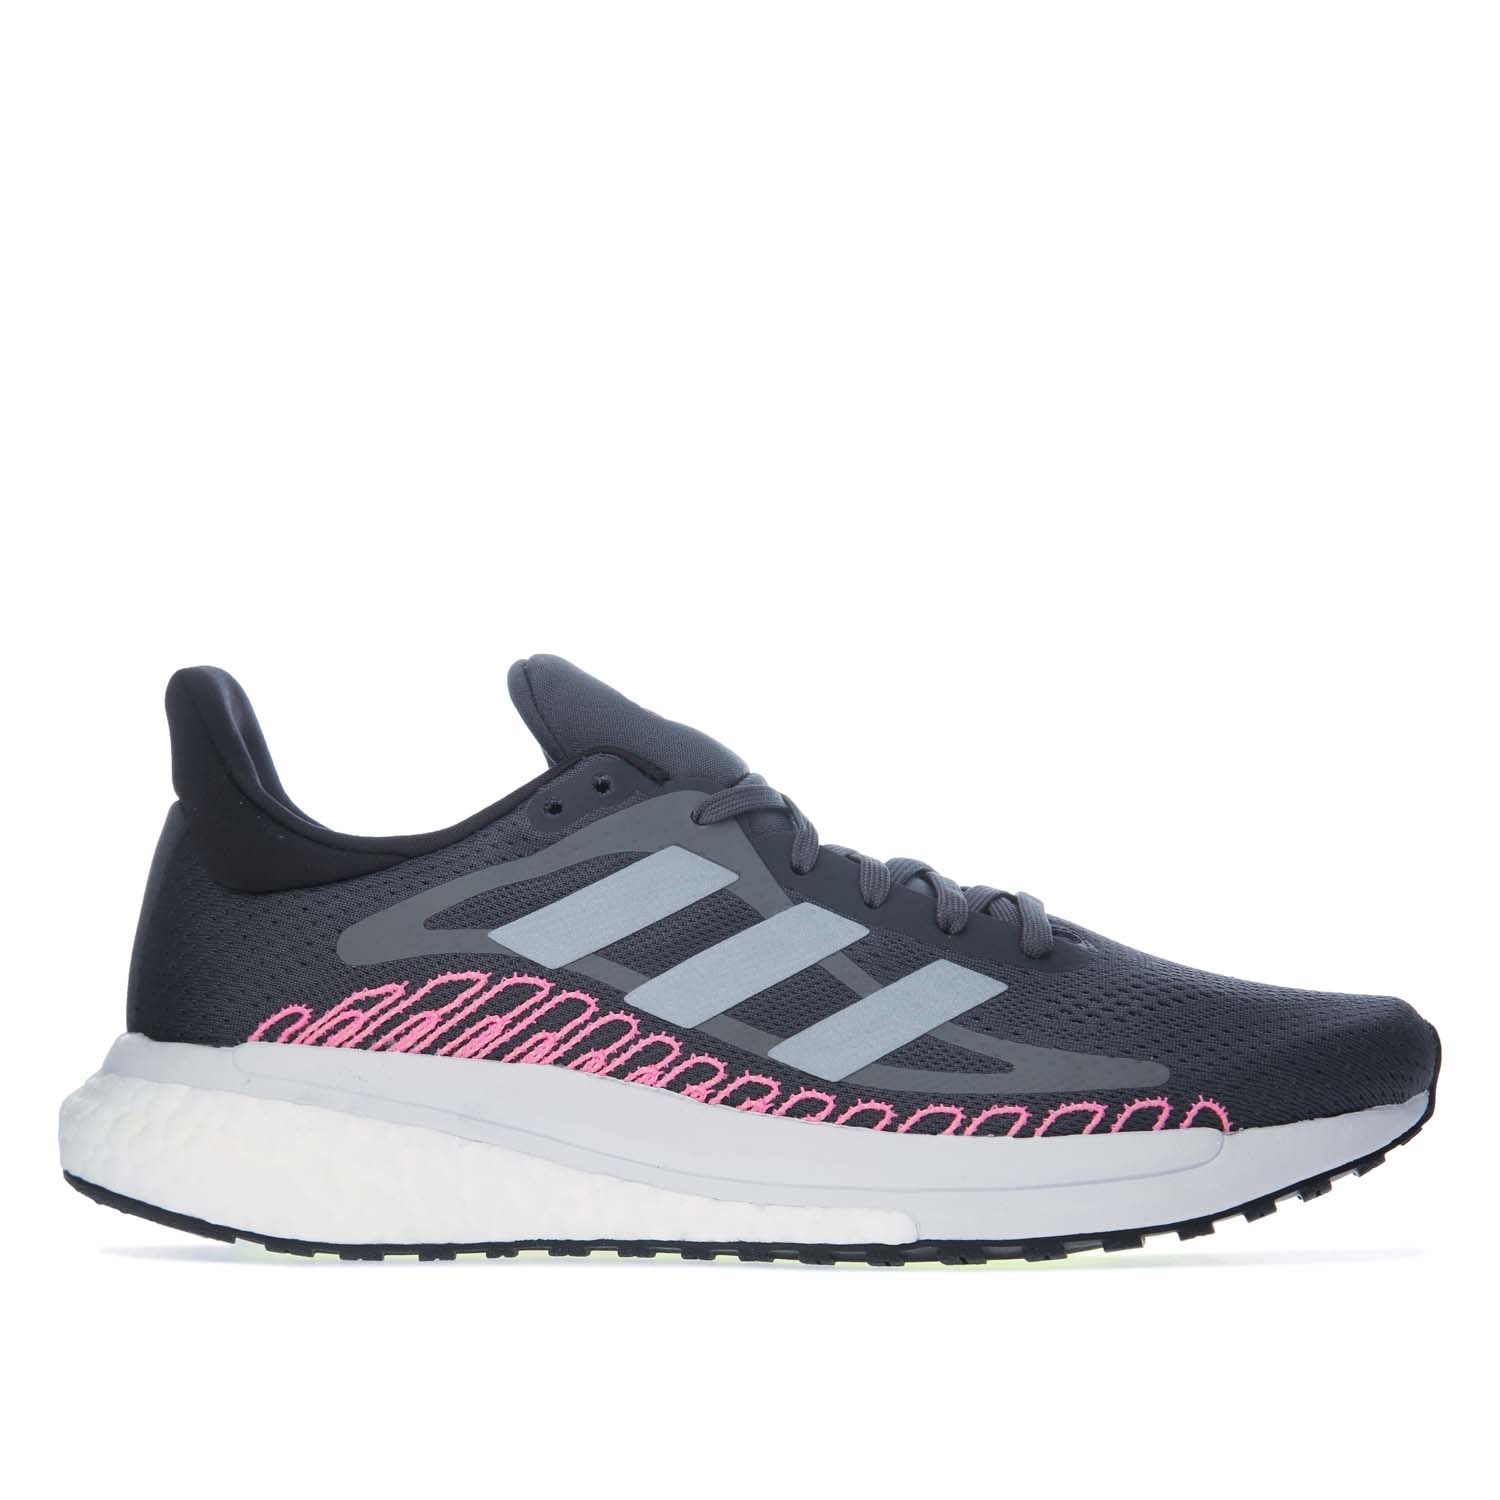 Womens SolarGlide ST Running Shoes